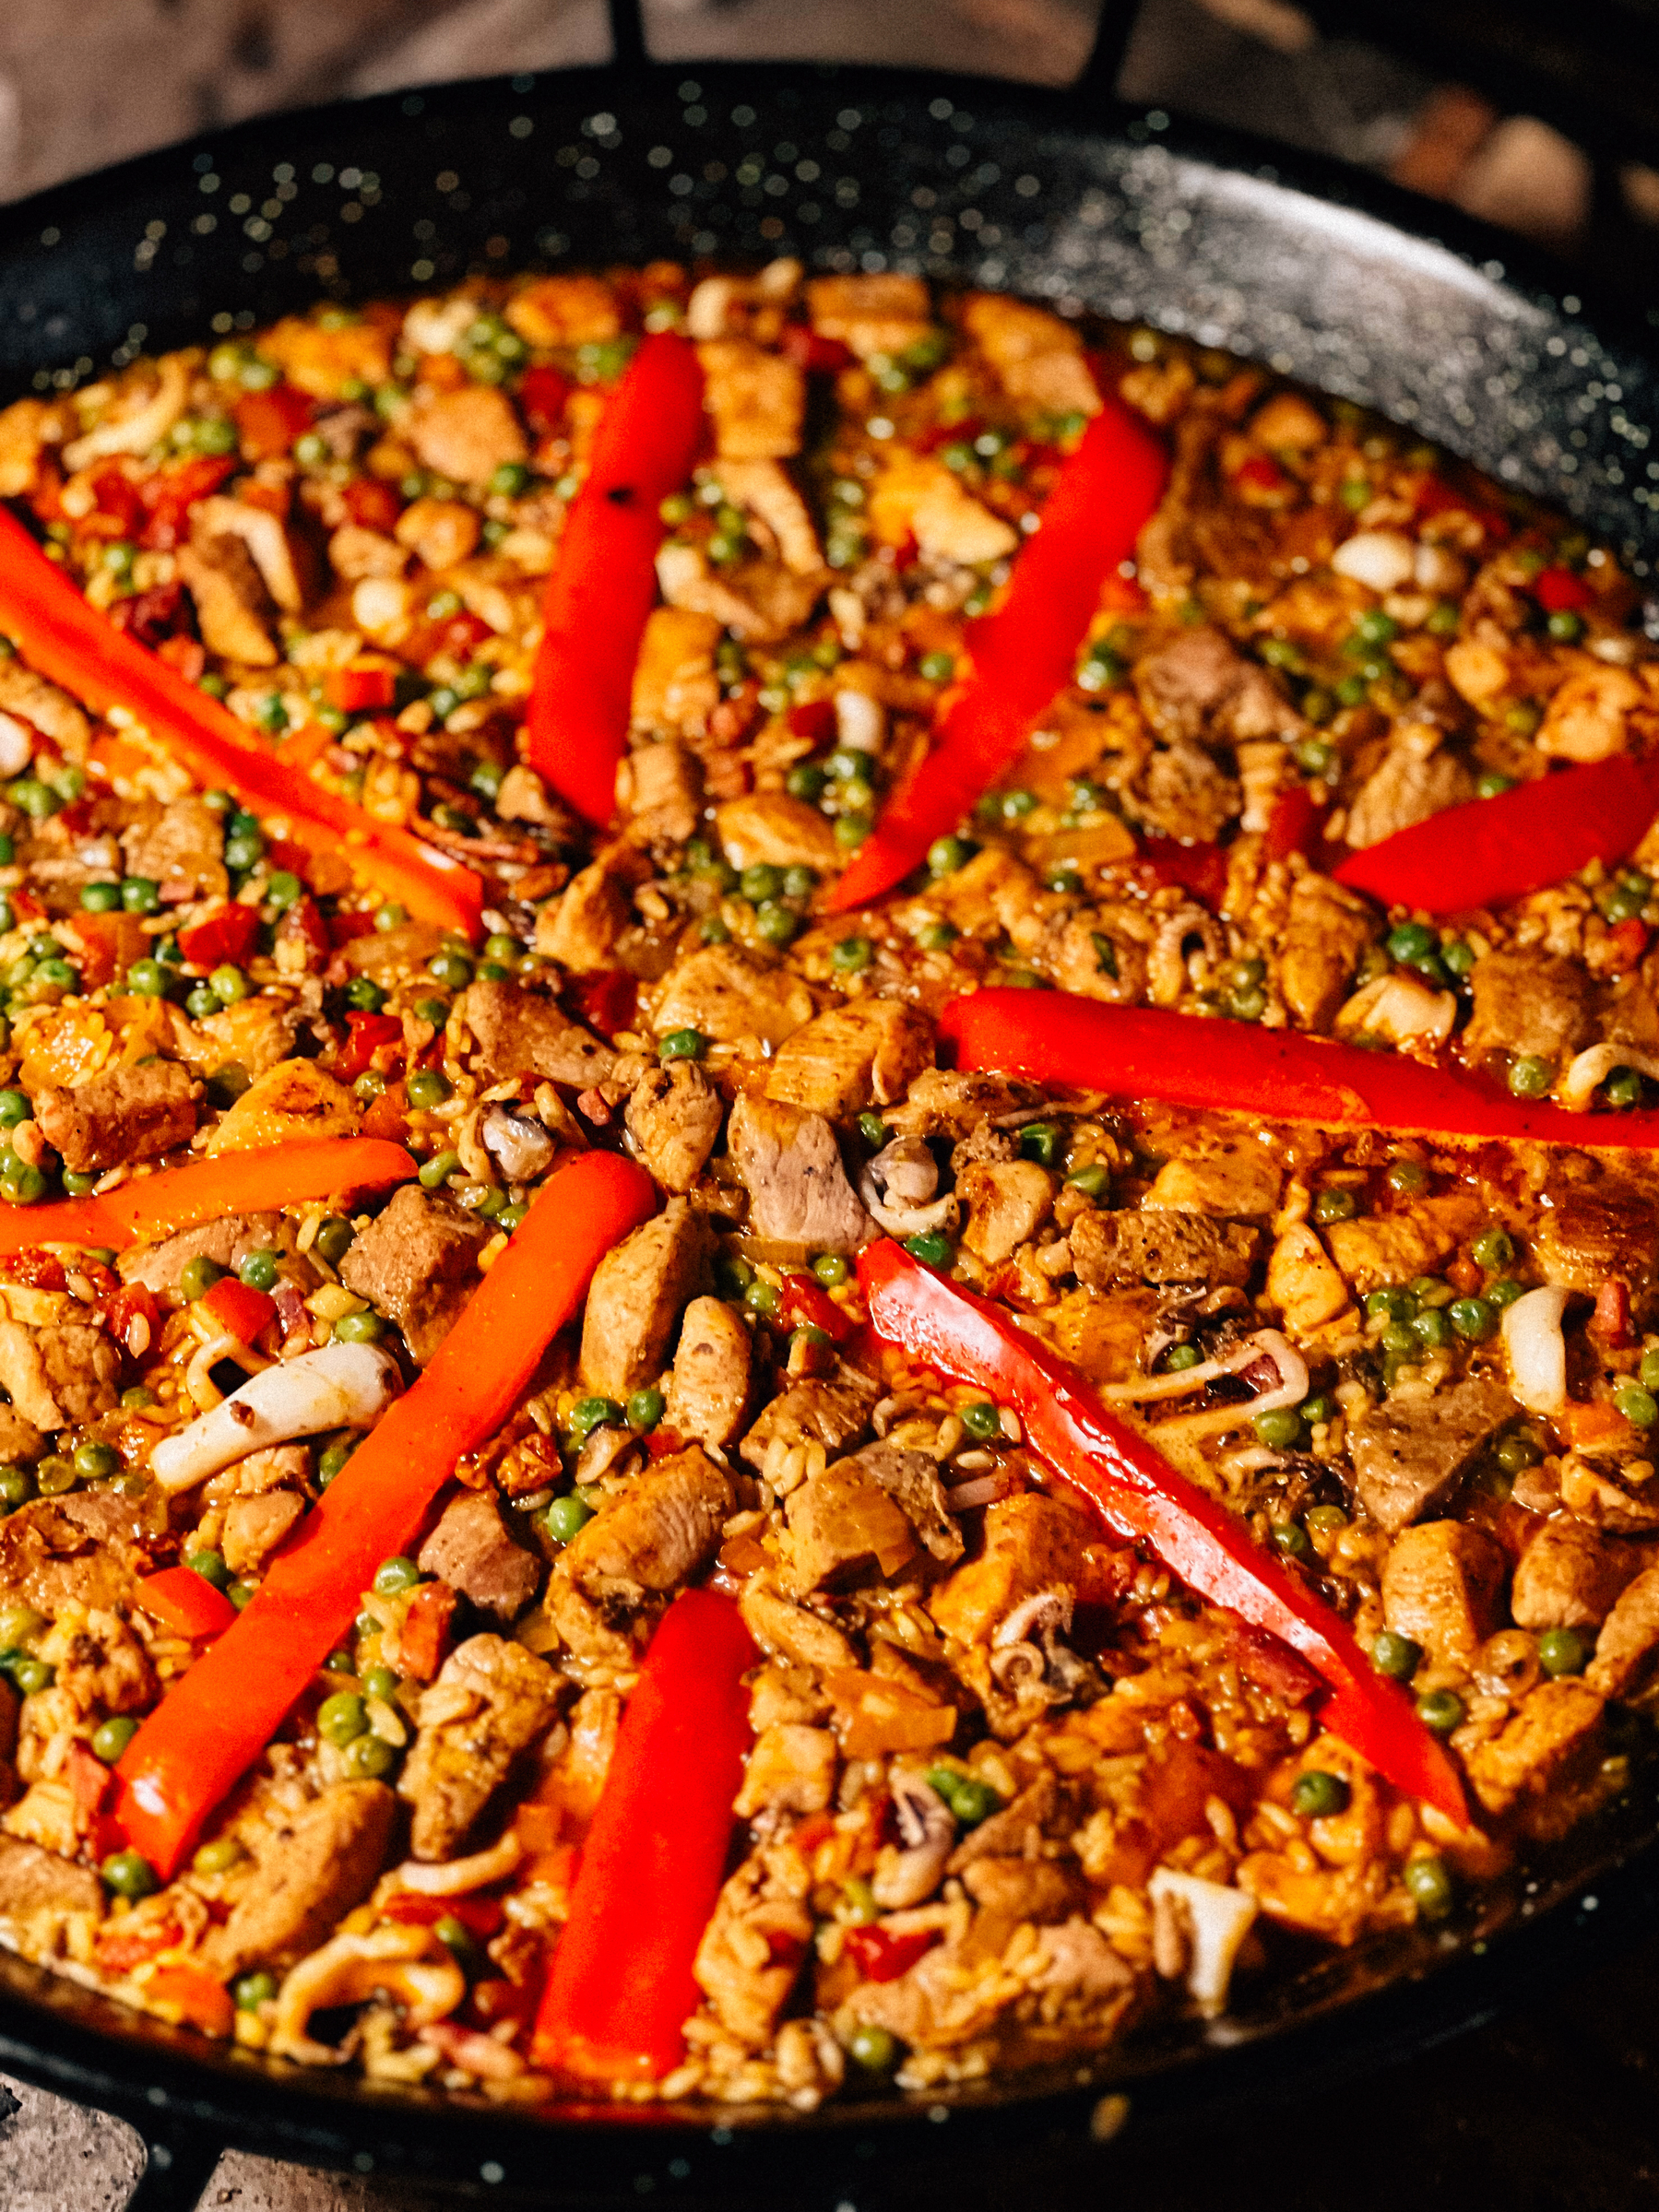 Paella with chicken, red bell peppers, peas, onions, and rice in a paella pan.